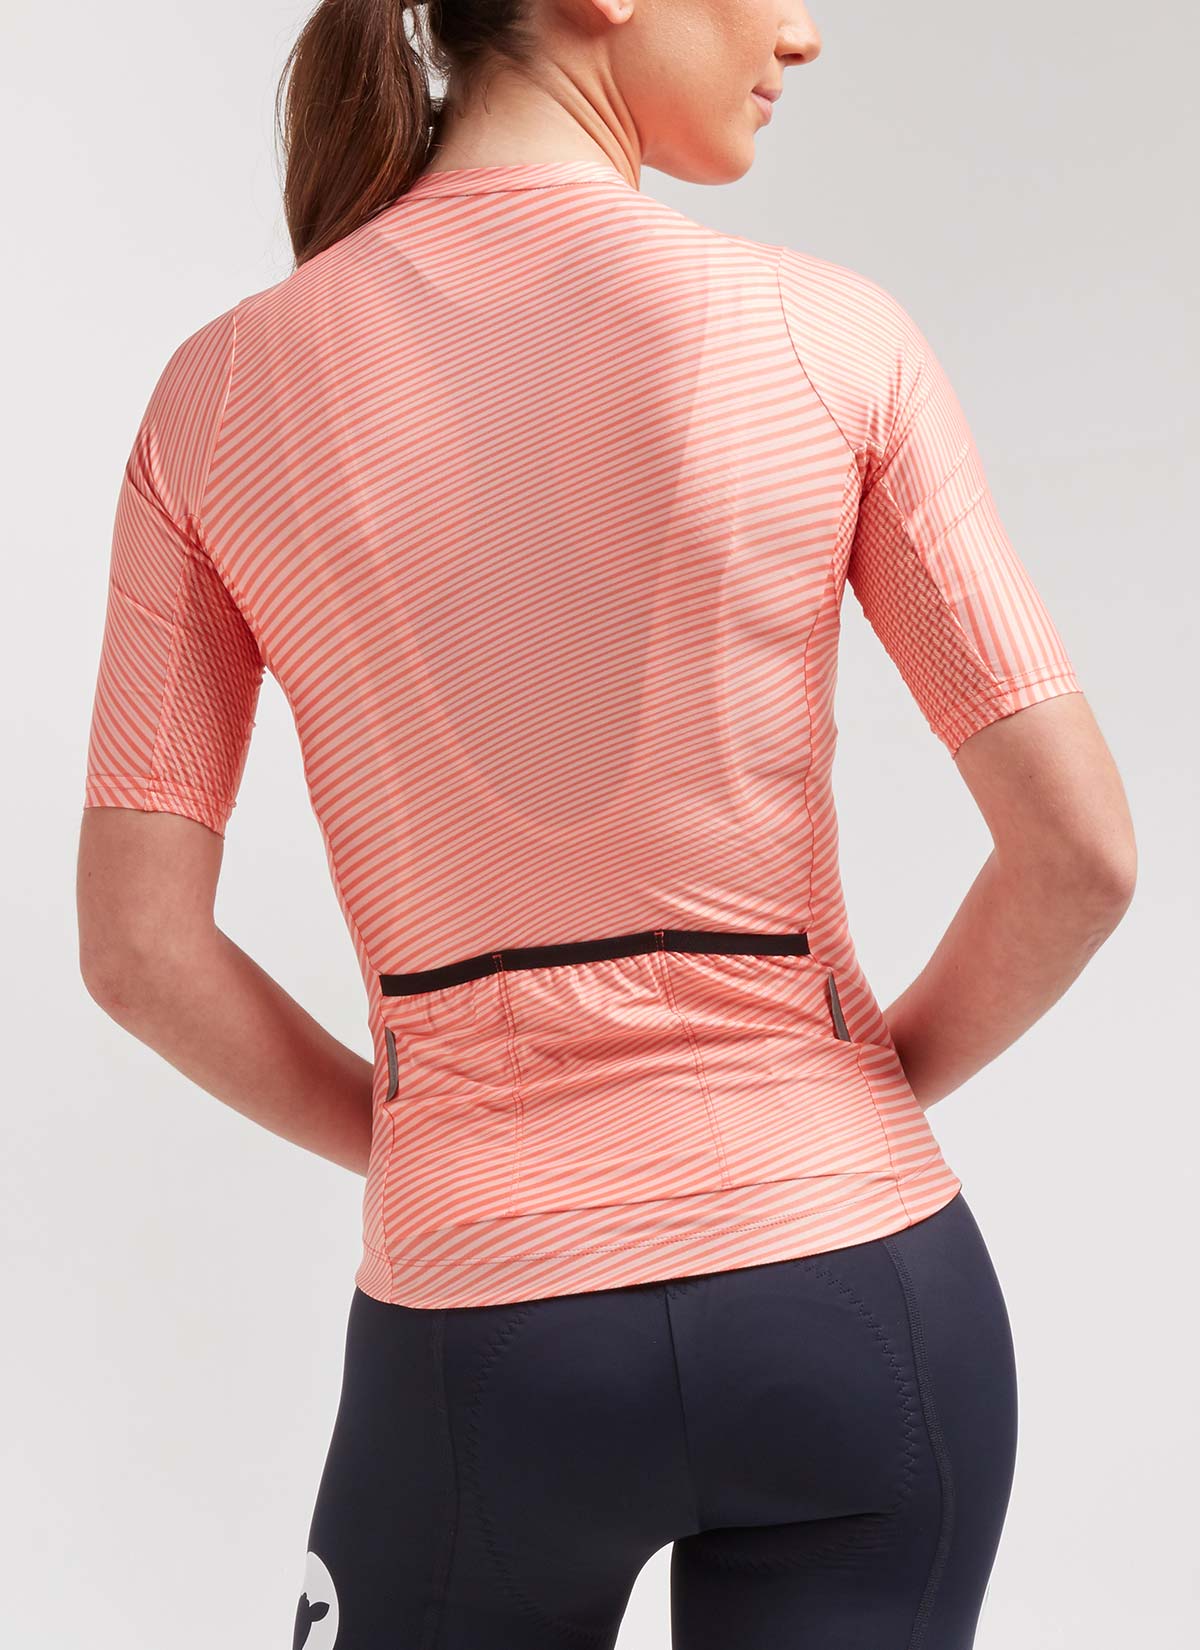 Black Sheep Cycling Women's Team Jersey - Coral Moire | CYCLISM